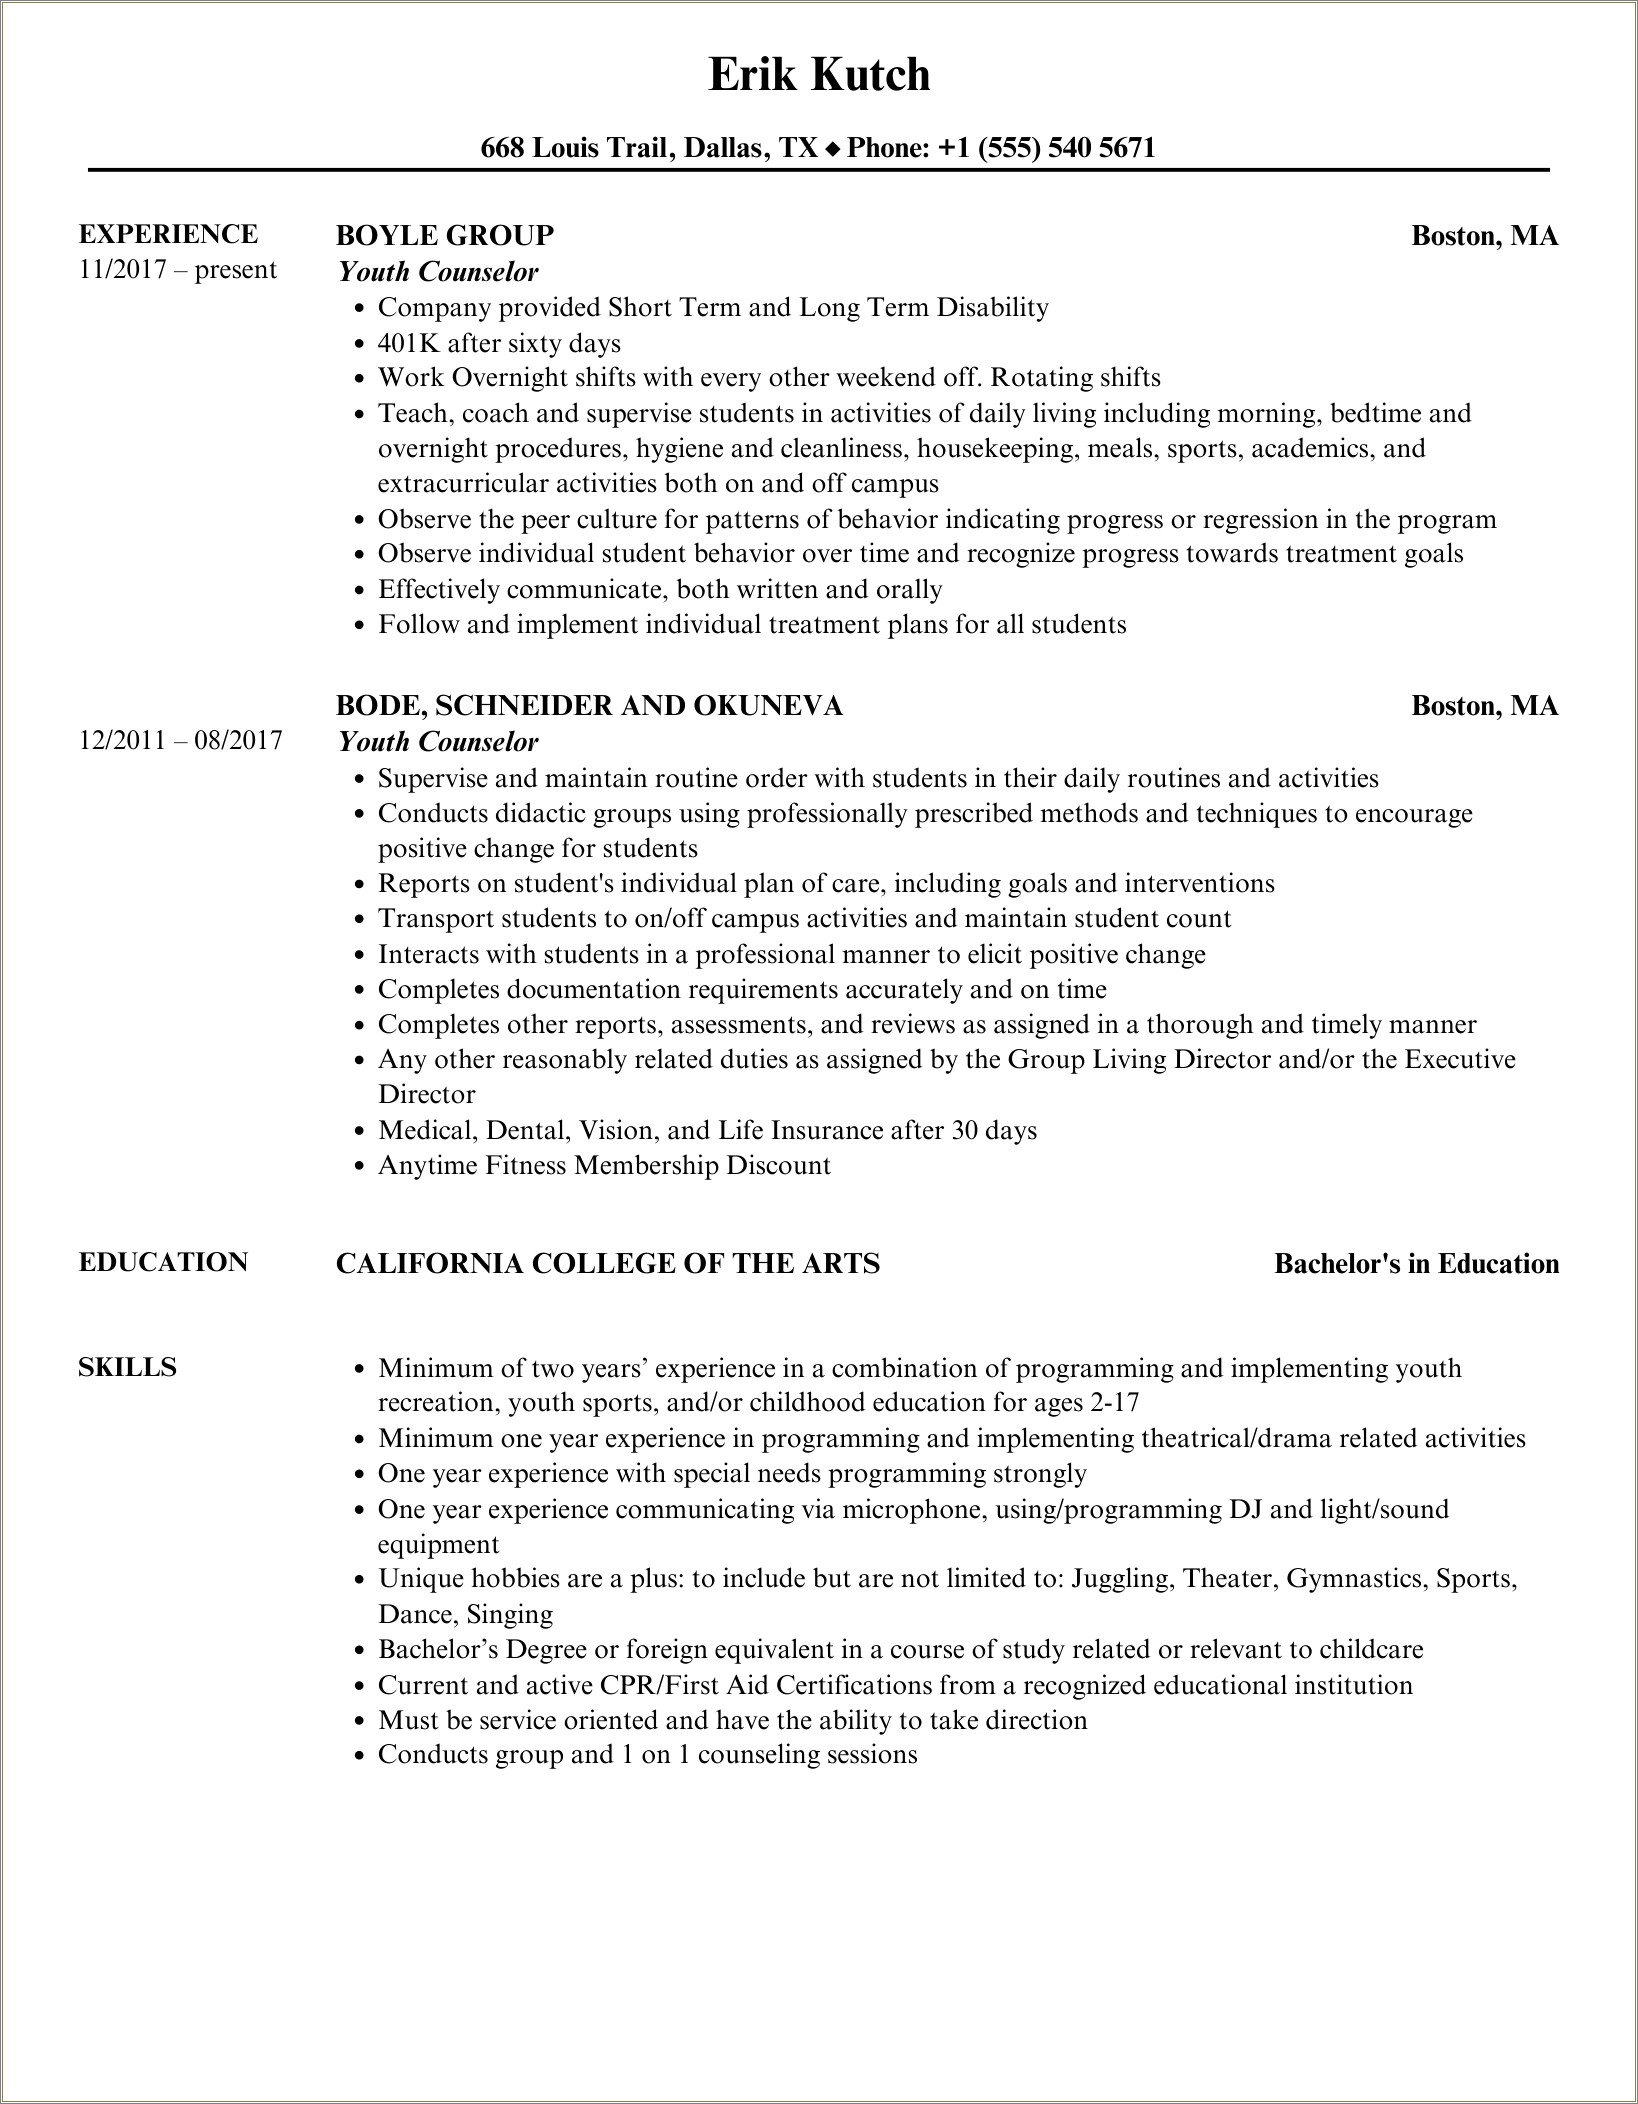 Youth Counselor Job Description For Resume